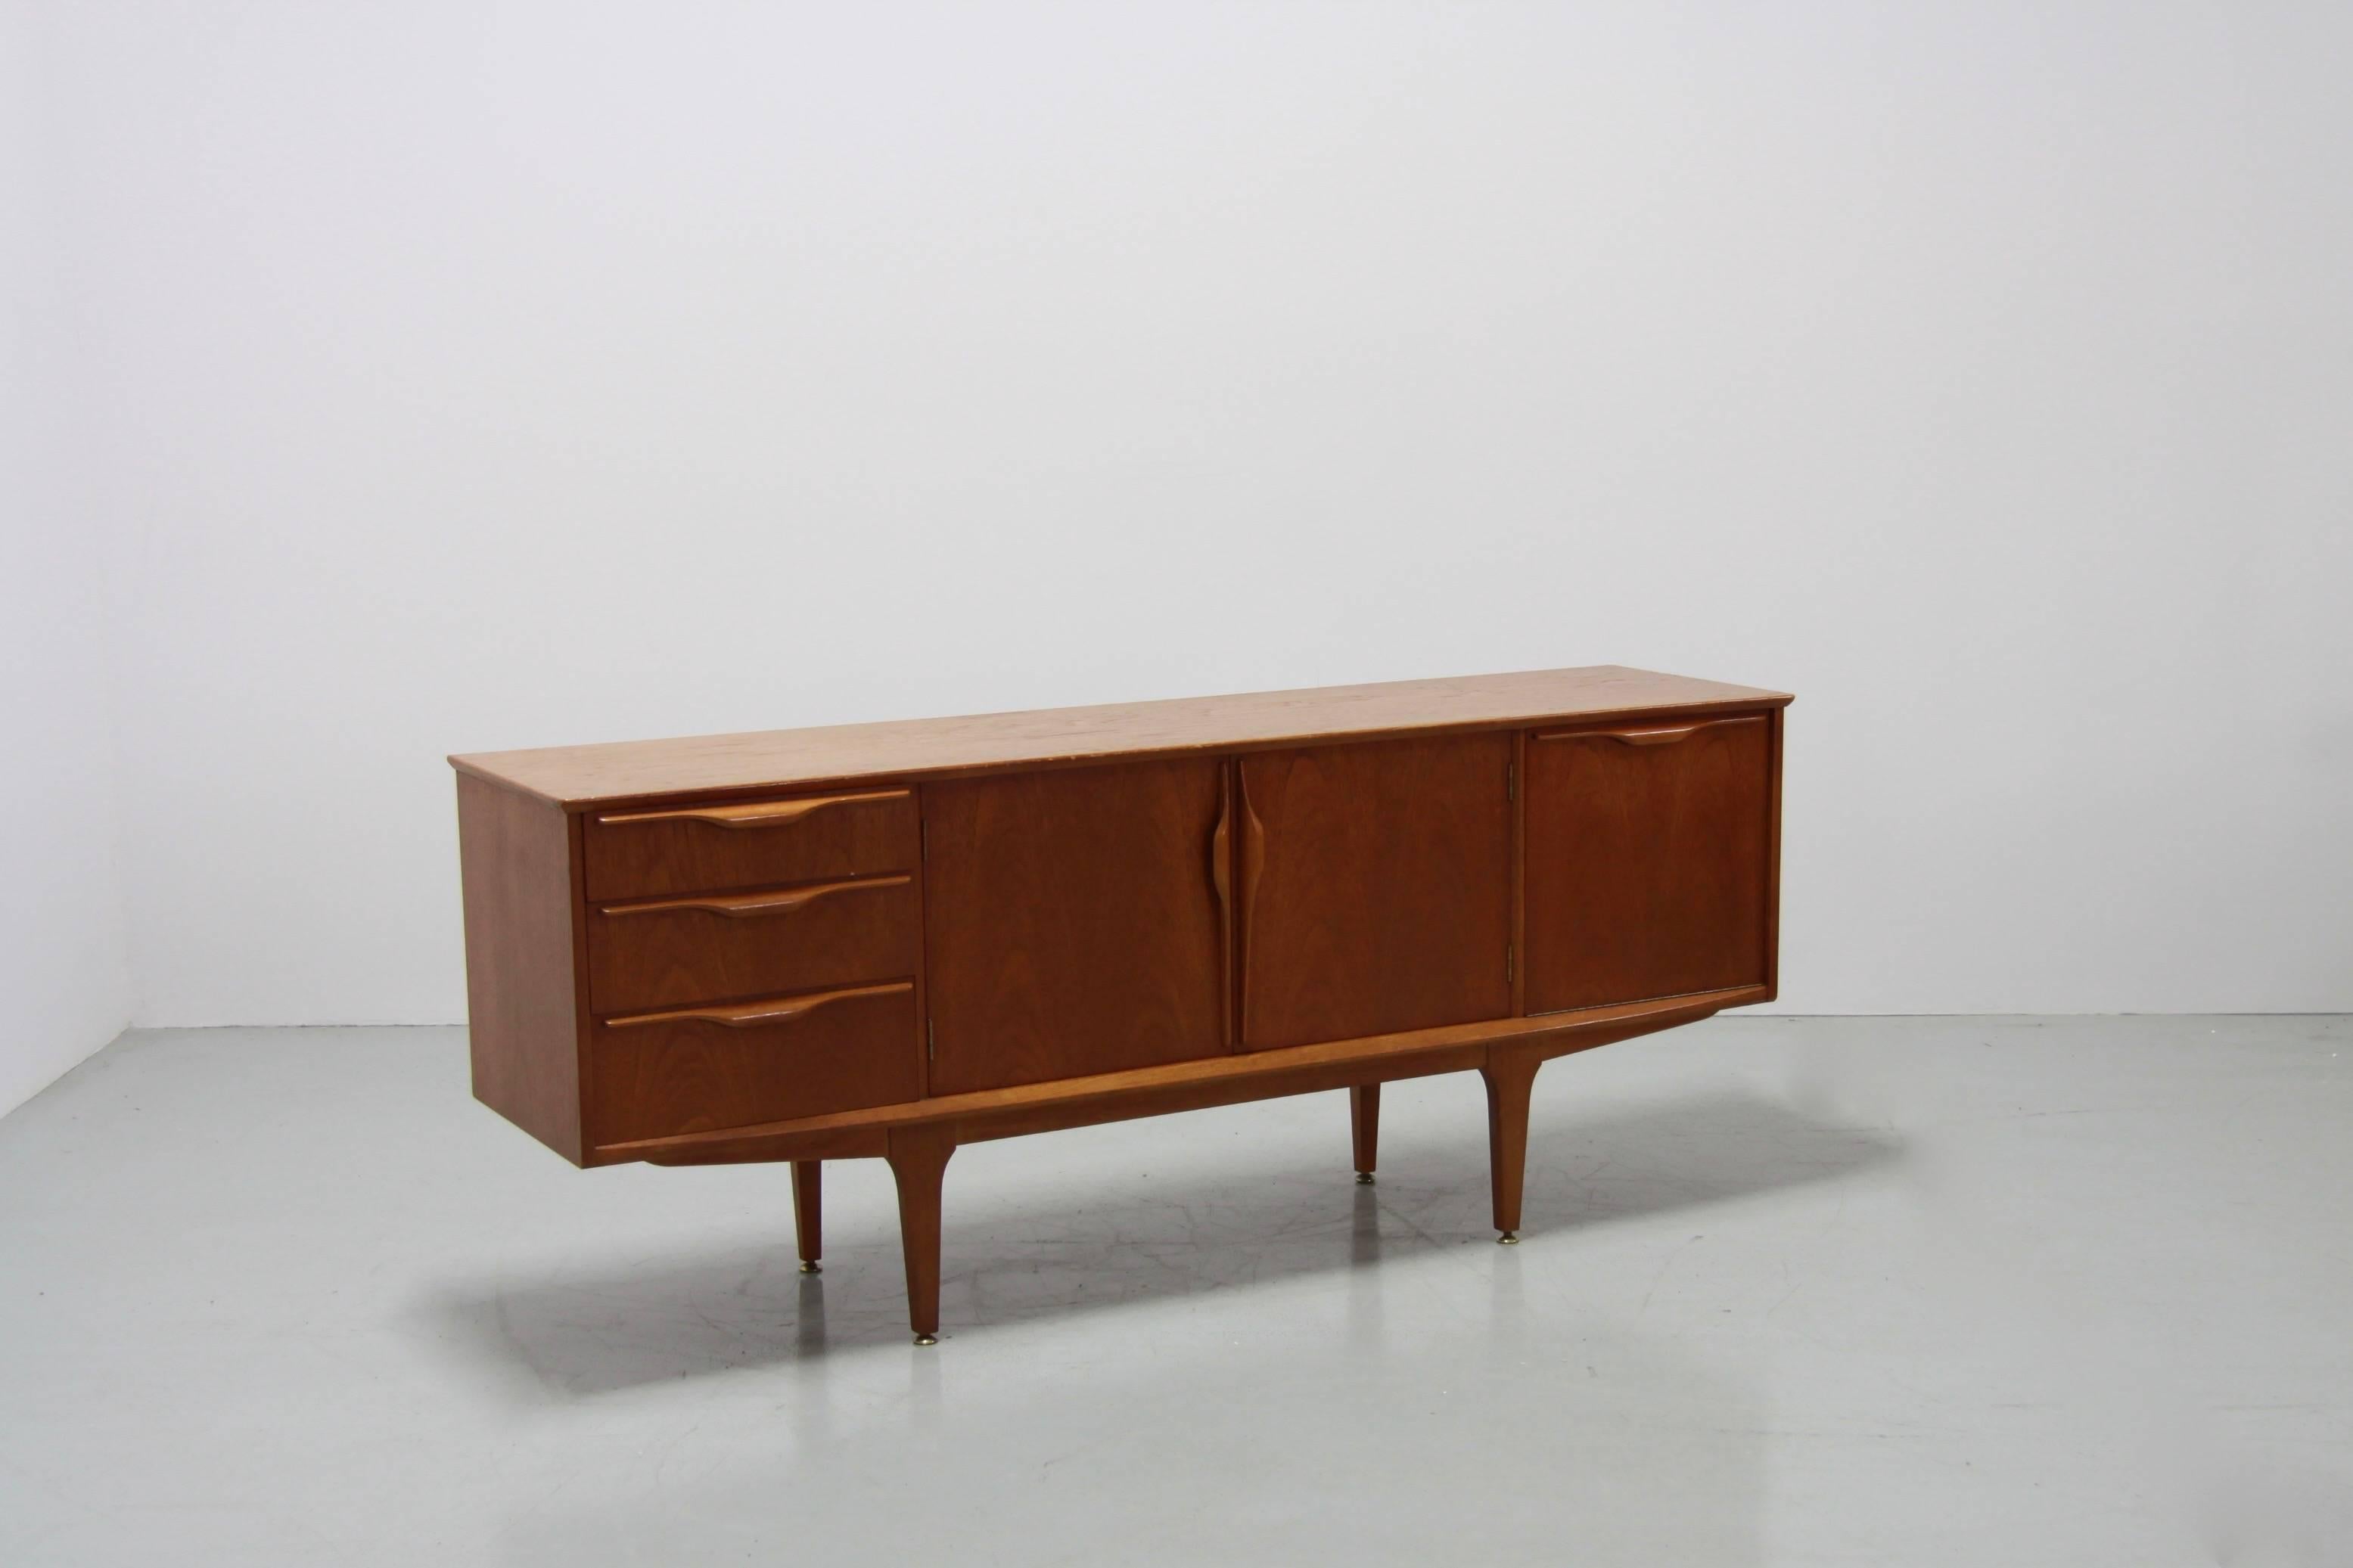 This beautiful classic sideboard was manufactured in 1960s by Jentique in Norfolk, England. It has handcrafted handles and is made from solid teak. The upper drawer is padded with green fabric and the feet are decorated with metal details.